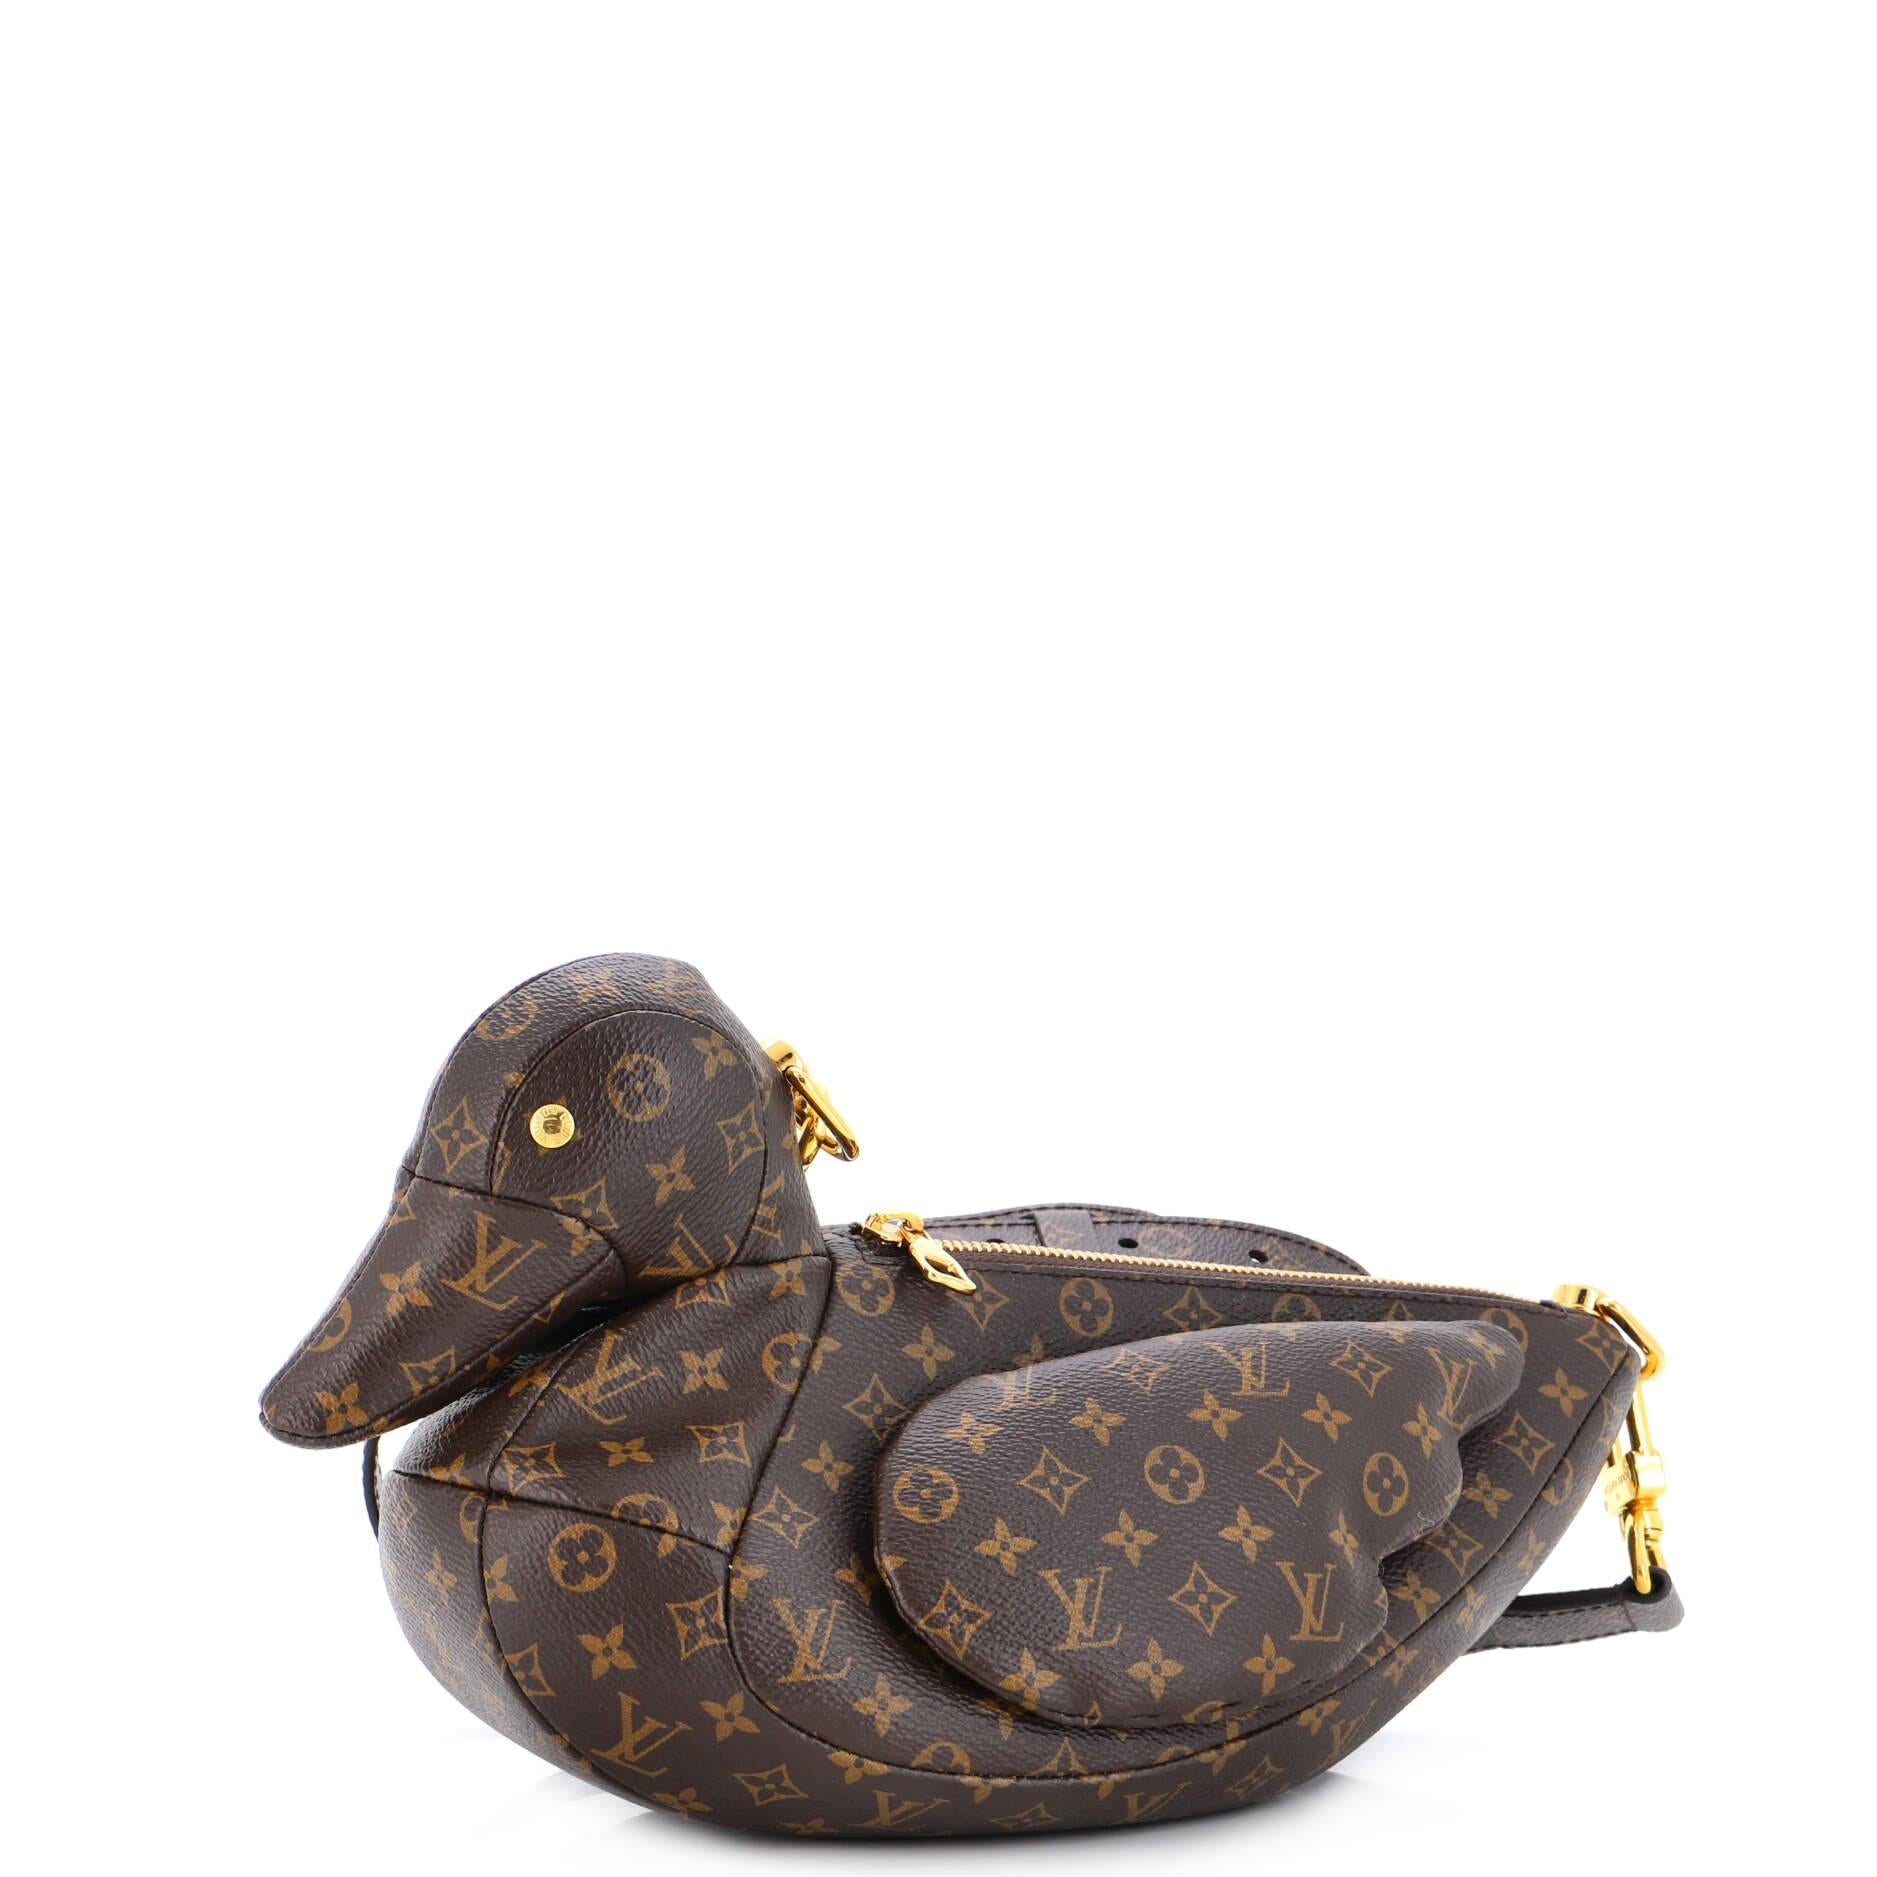 Louis Vuitton Duck - 4 For Sale on 1stDibs  louis vuitton duck bag, louis  duck, louis vuitton duck bag price